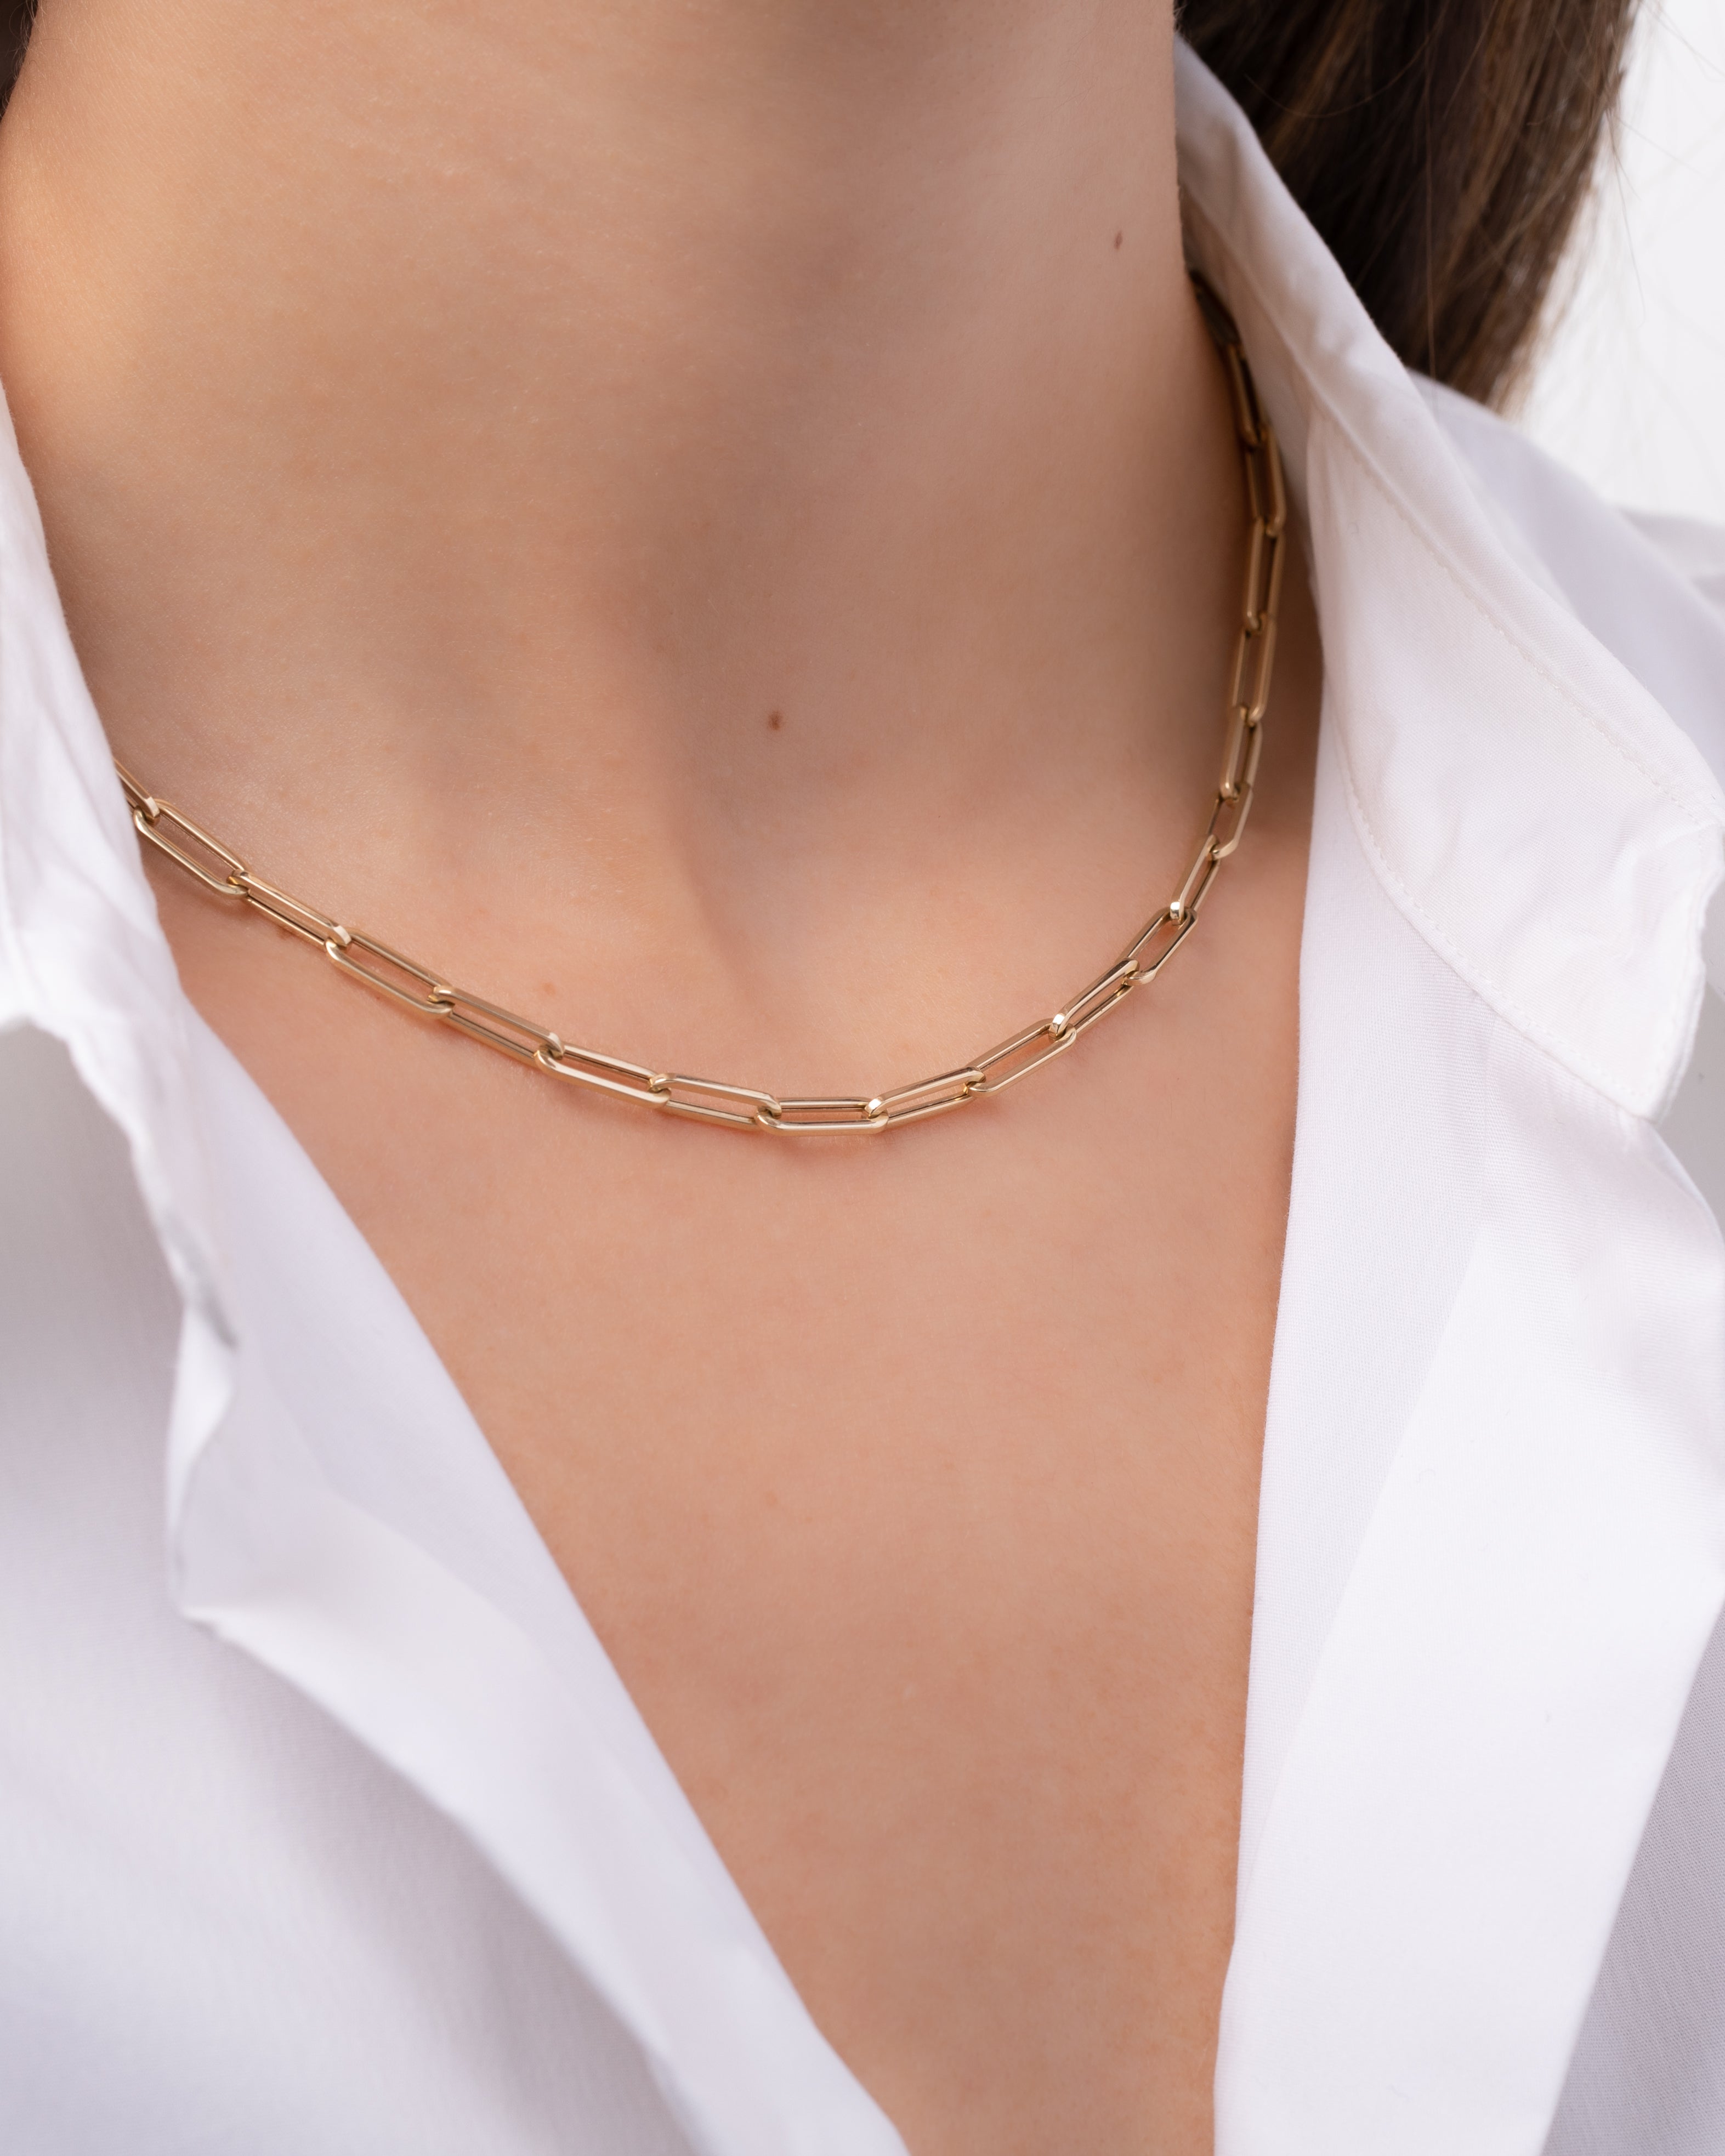 14k Yellow Gold Paperclip Chain